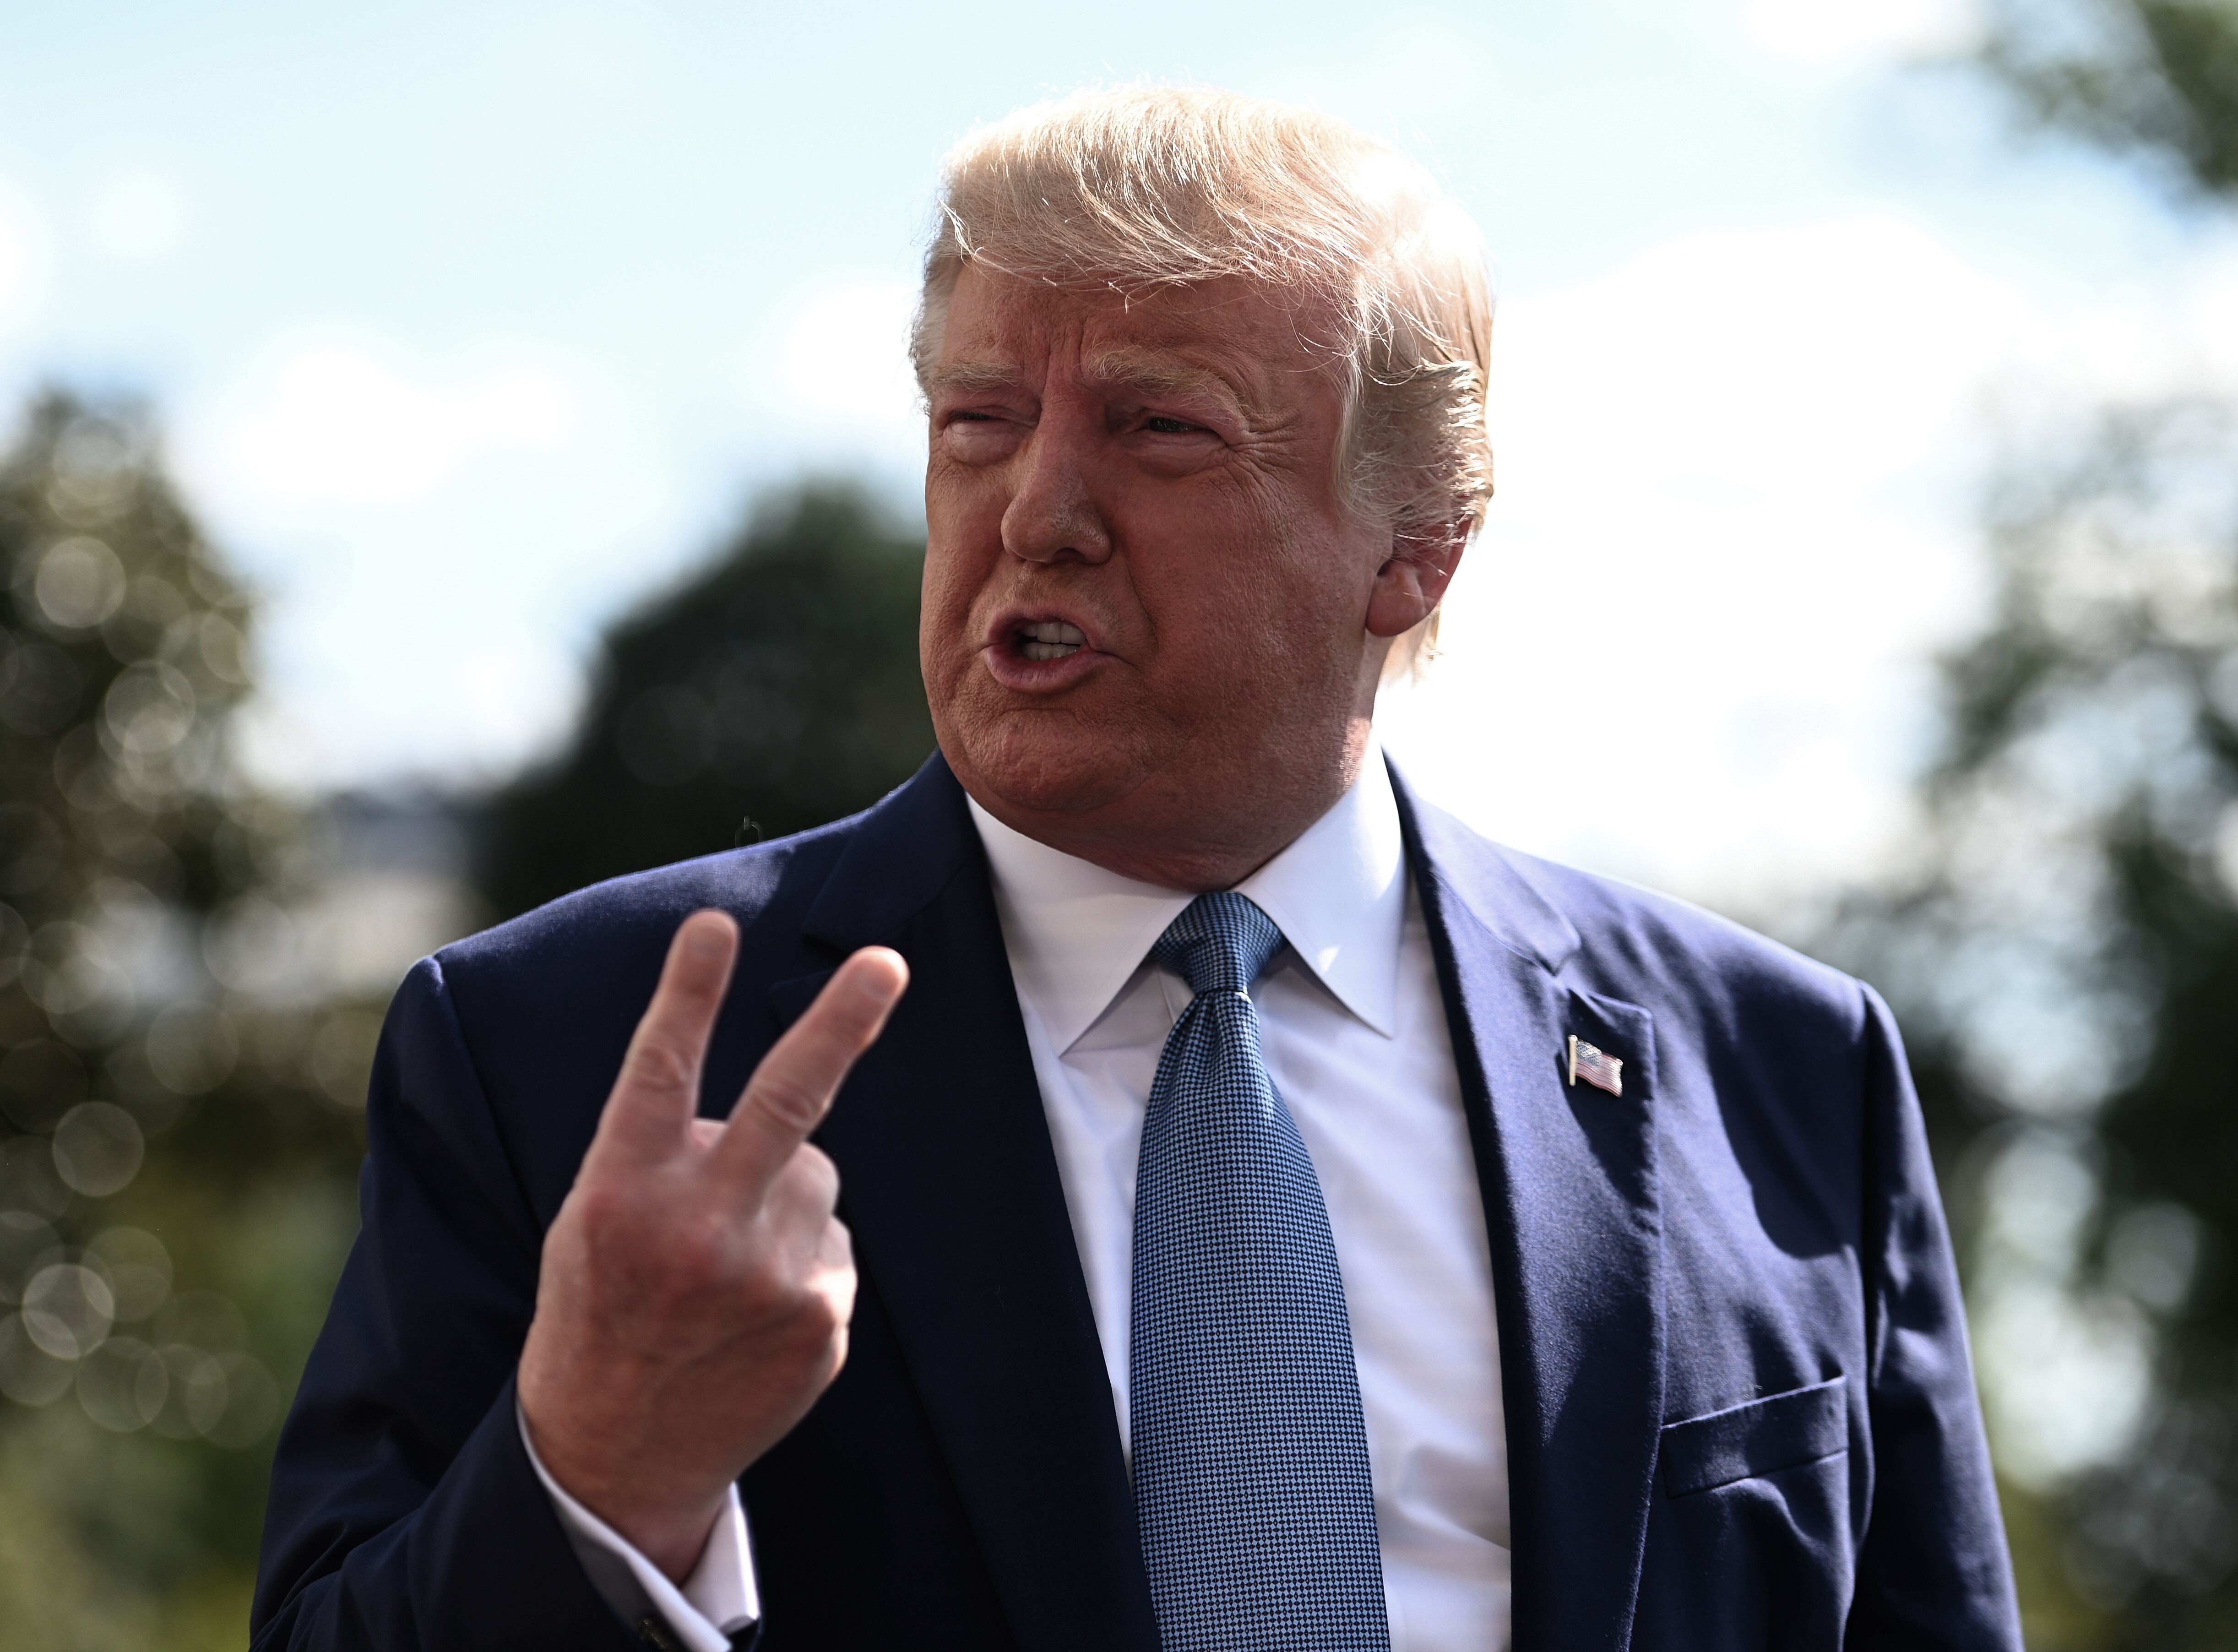 Donald Trump, pictured weeks before his November 2019 trip, talks to journalists on the South Lawn of the White House before travelling to Walter Reed National Military Medical Centre to visit injured military service members. File photo: AFP